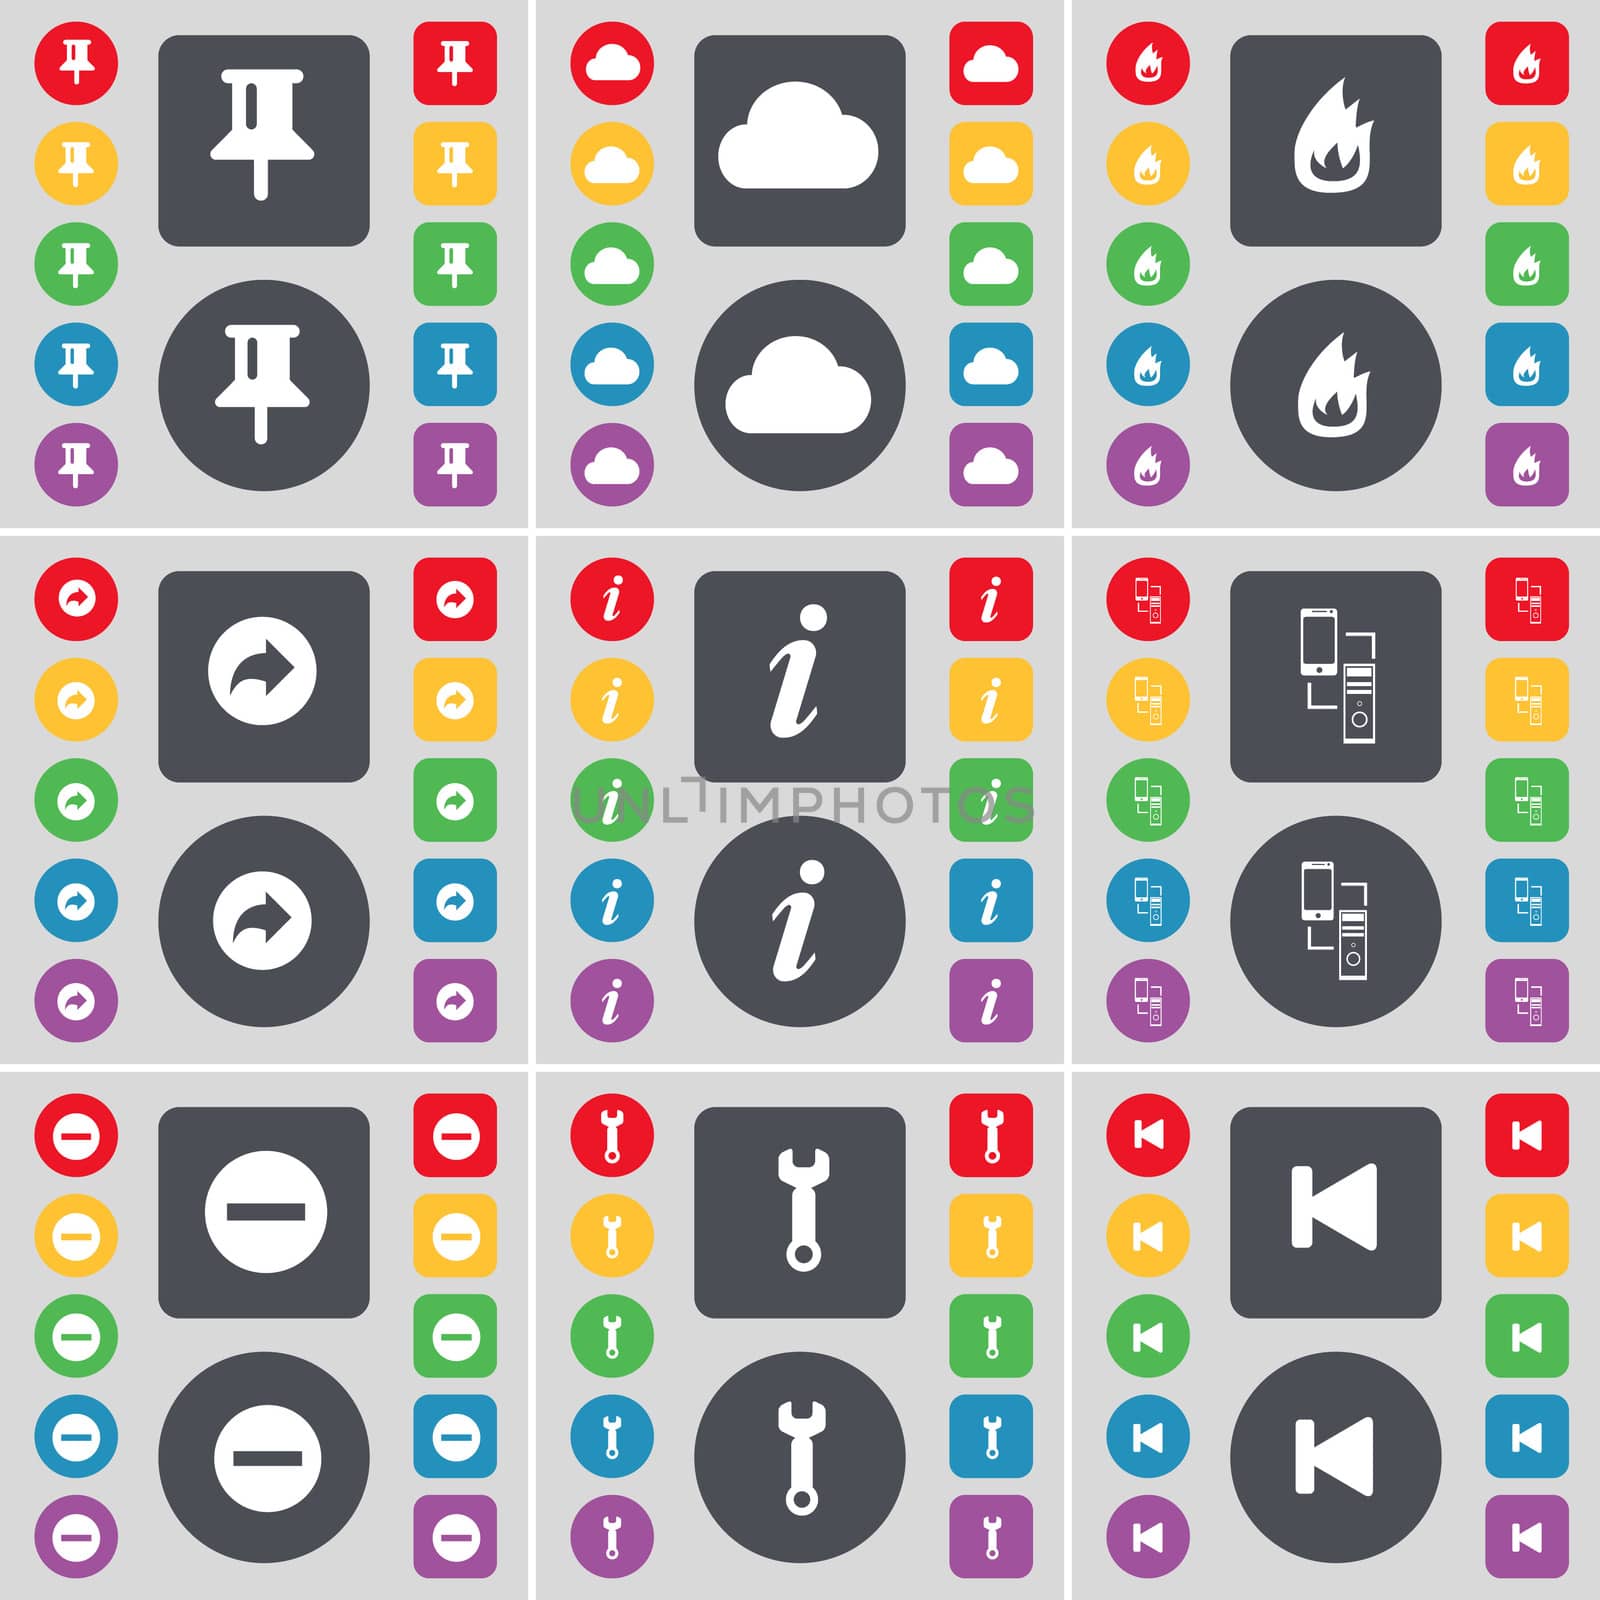 Pin, Cloud, Fire, Back, Information, Connection, Minus, Wrench, Media skip icon symbol. A large set of flat, colored buttons for your design.  by serhii_lohvyniuk